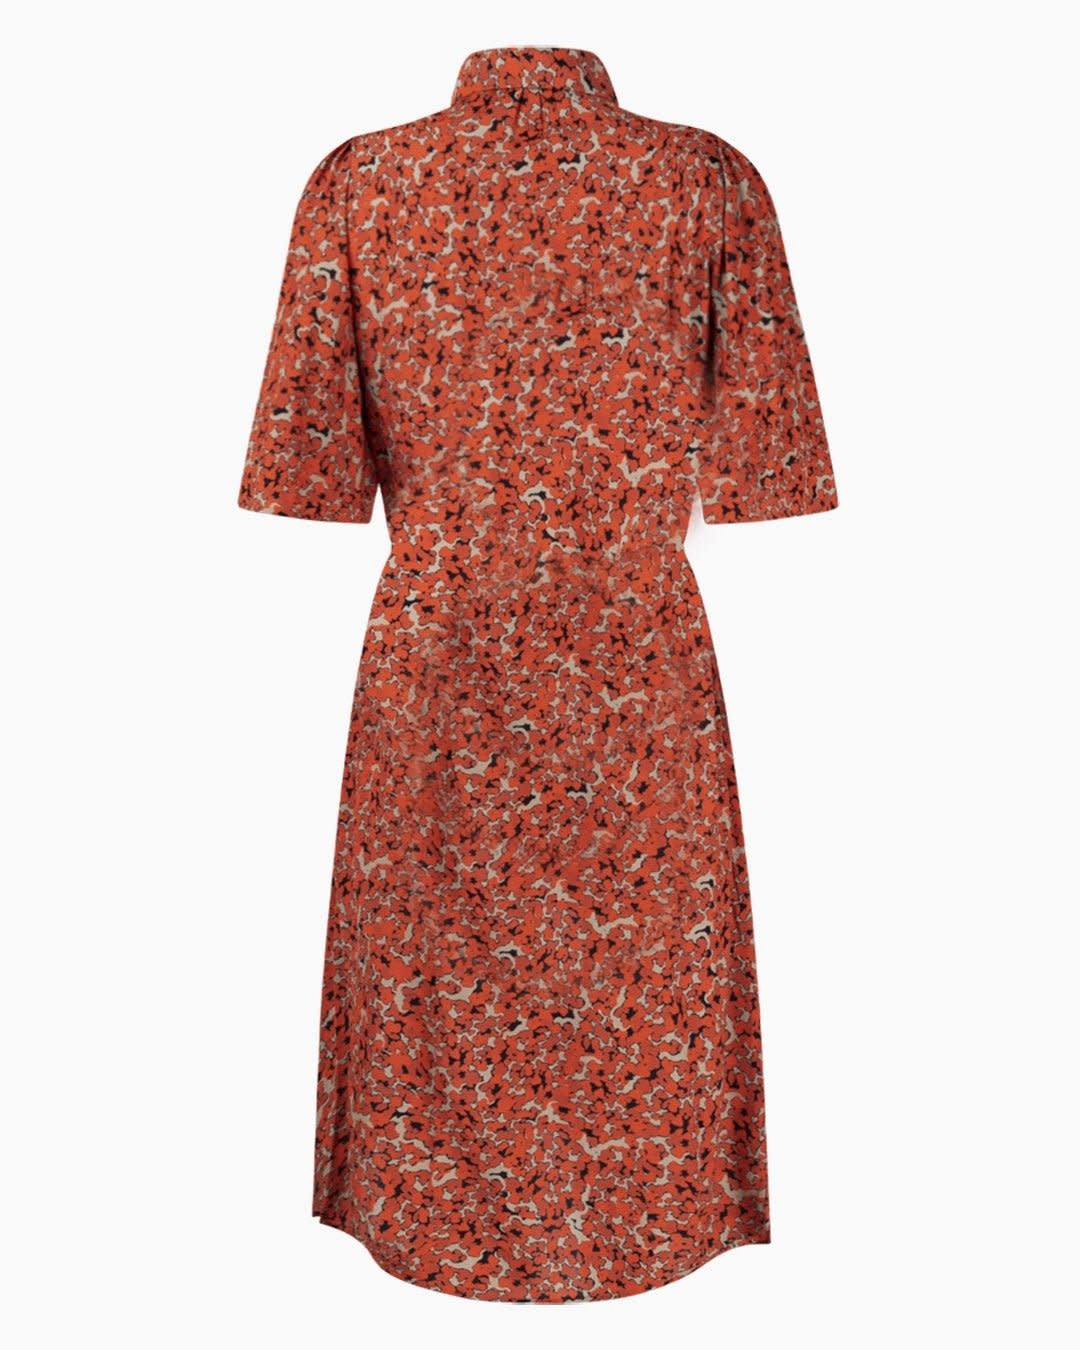 Another-Label Another-Label, Nasma dress s/s, dot red, M